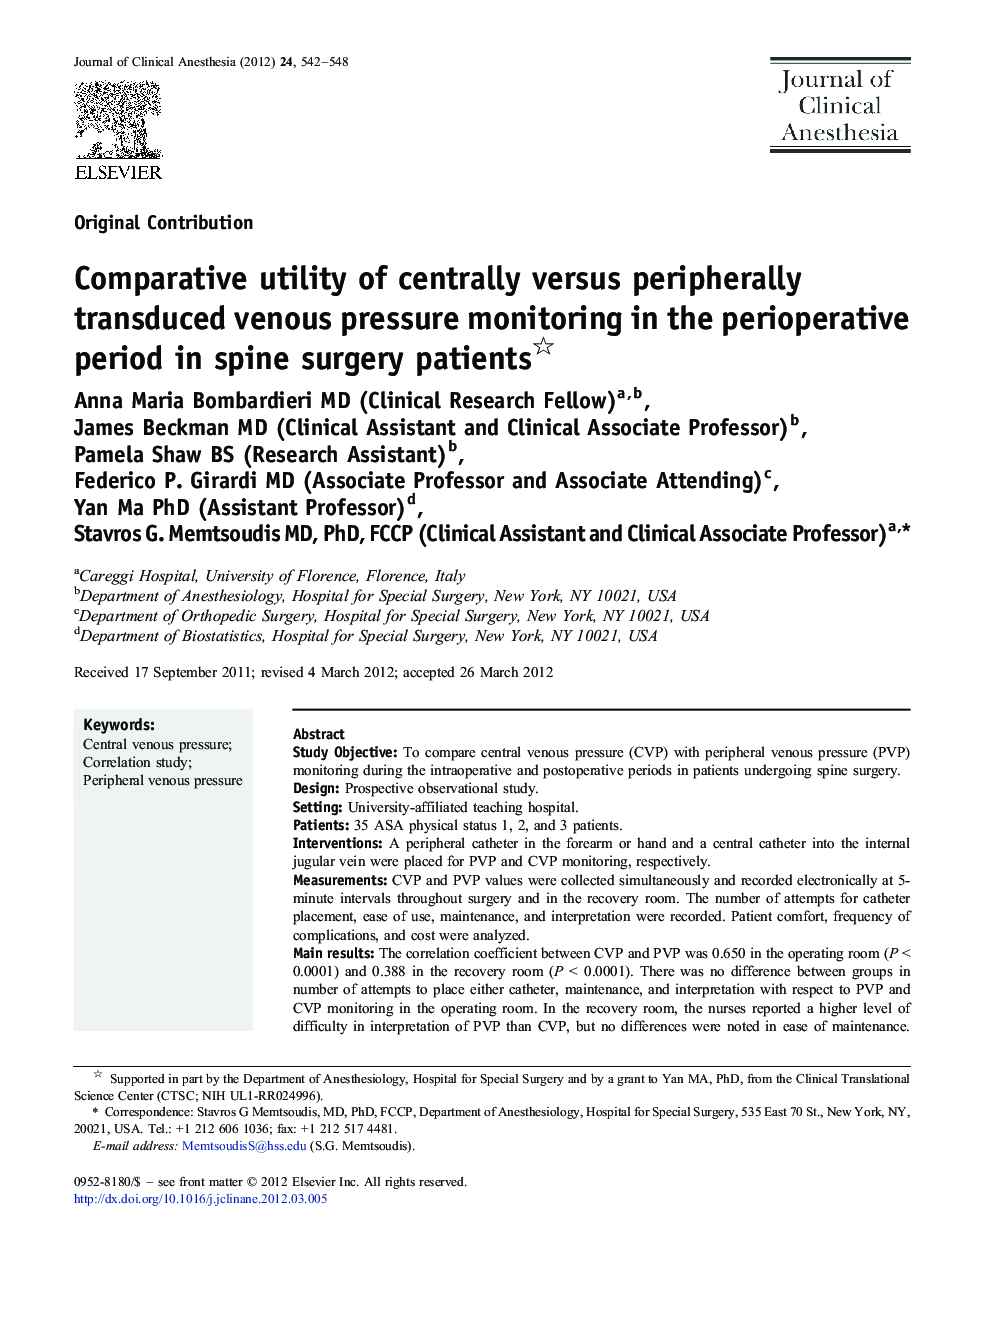 Comparative utility of centrally versus peripherally transduced venous pressure monitoring in the perioperative period in spine surgery patients 